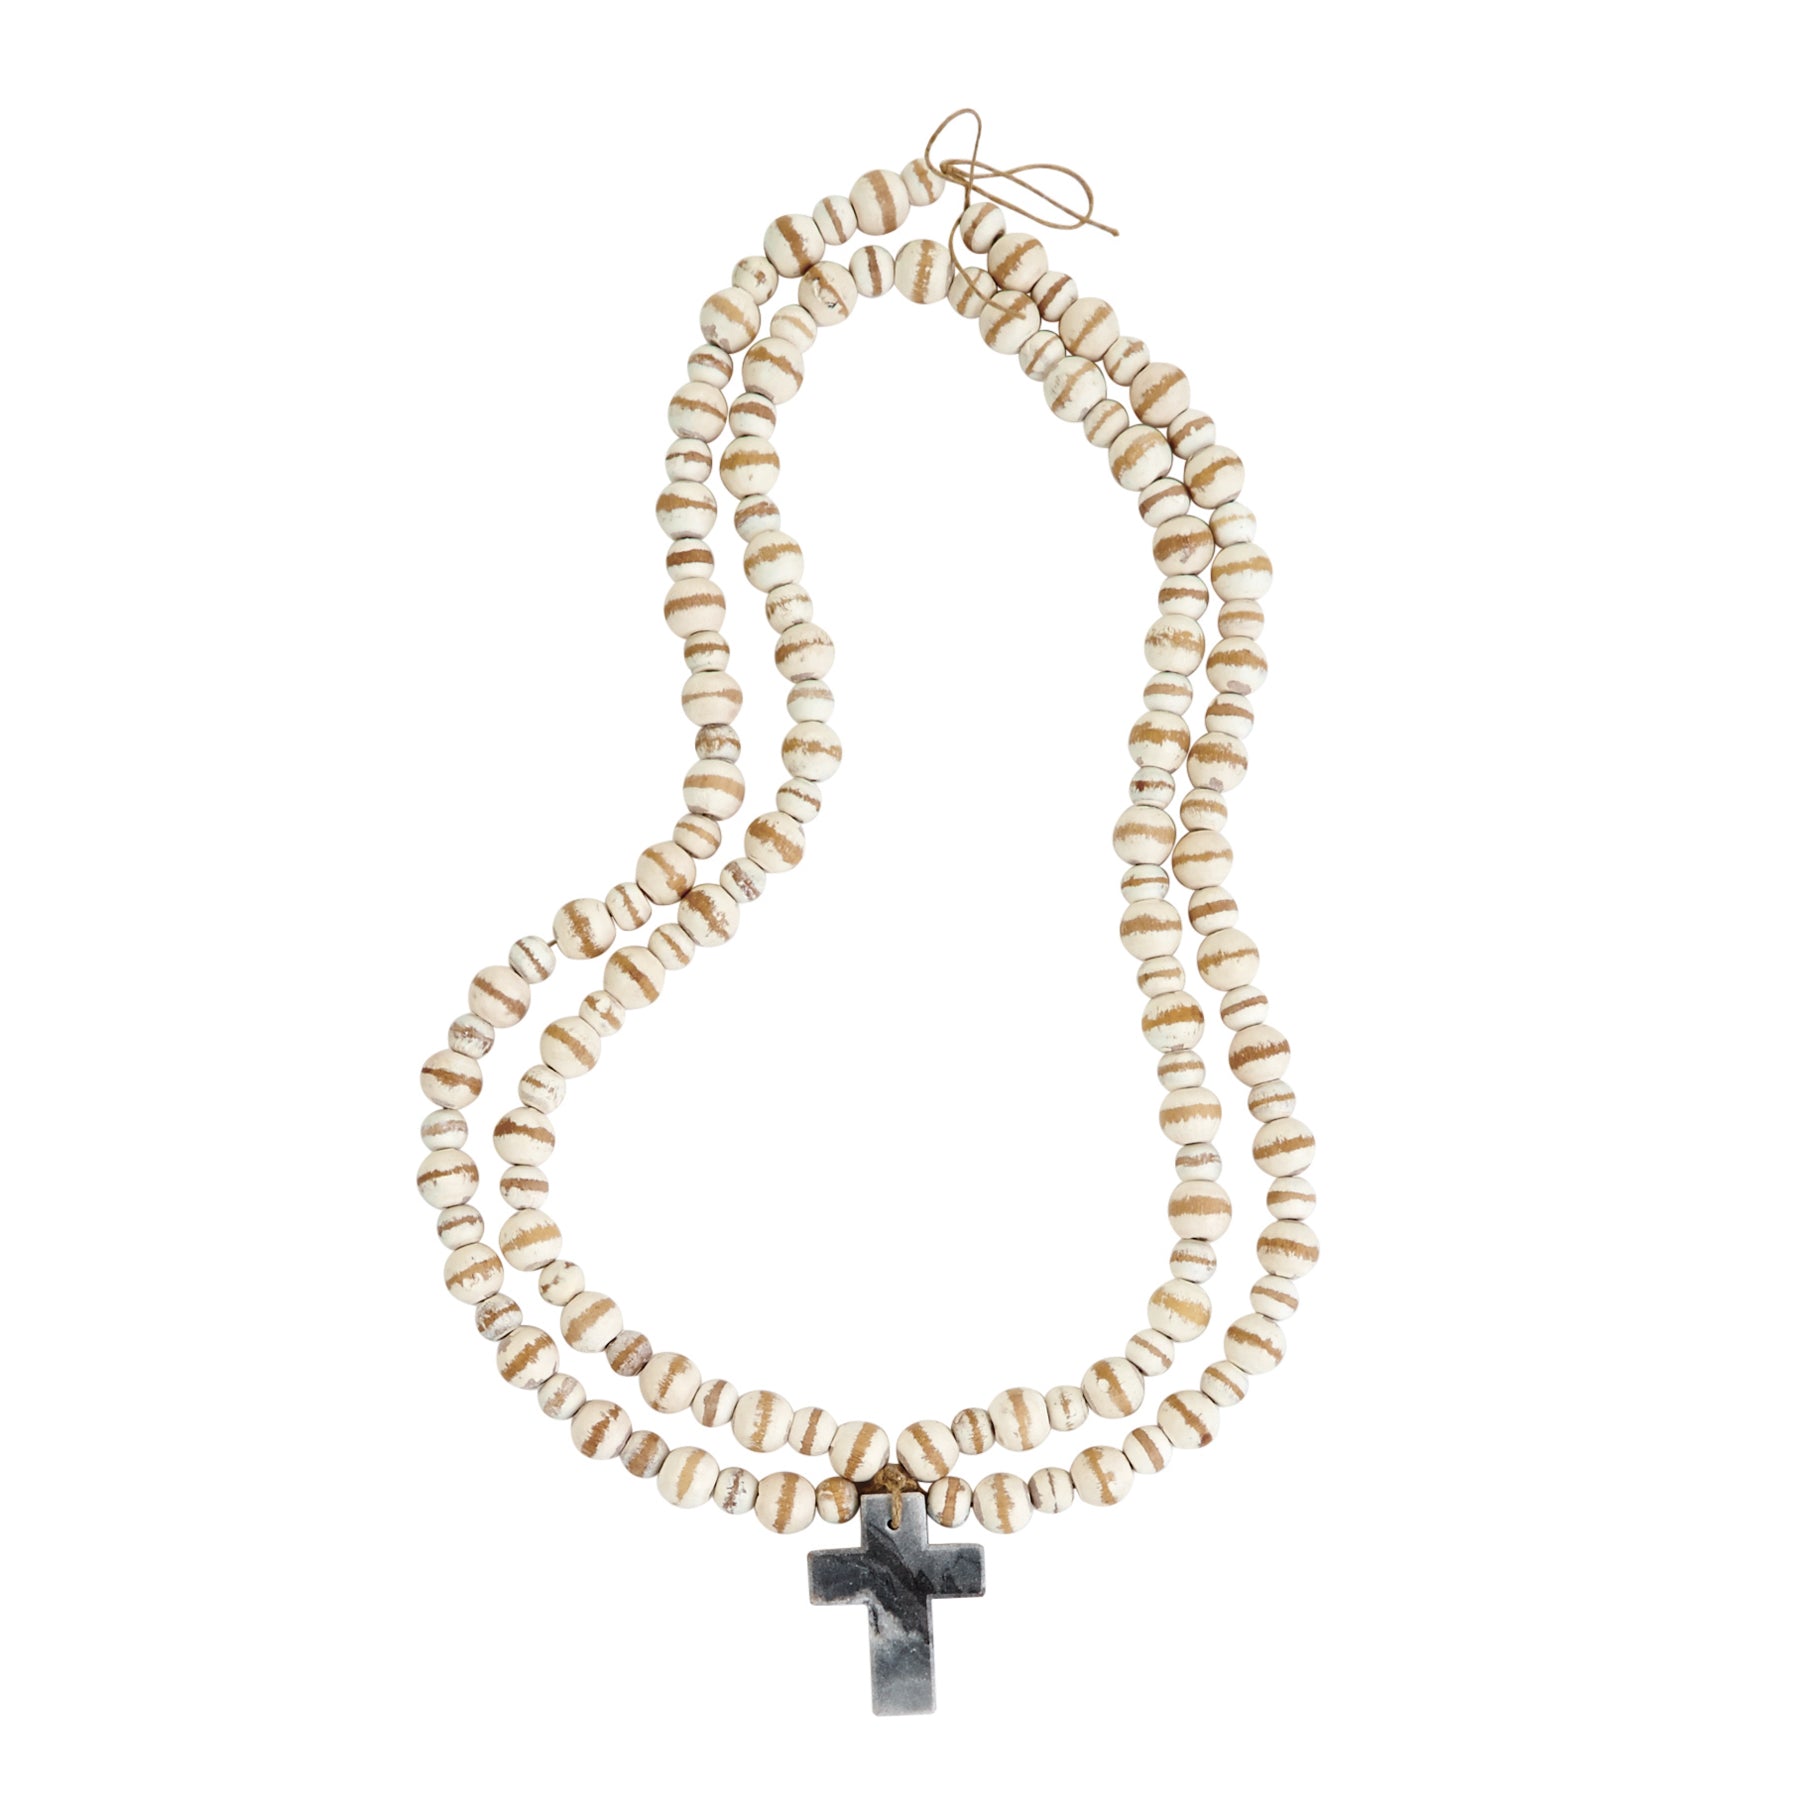 gray marble cross with wood beads on a white background